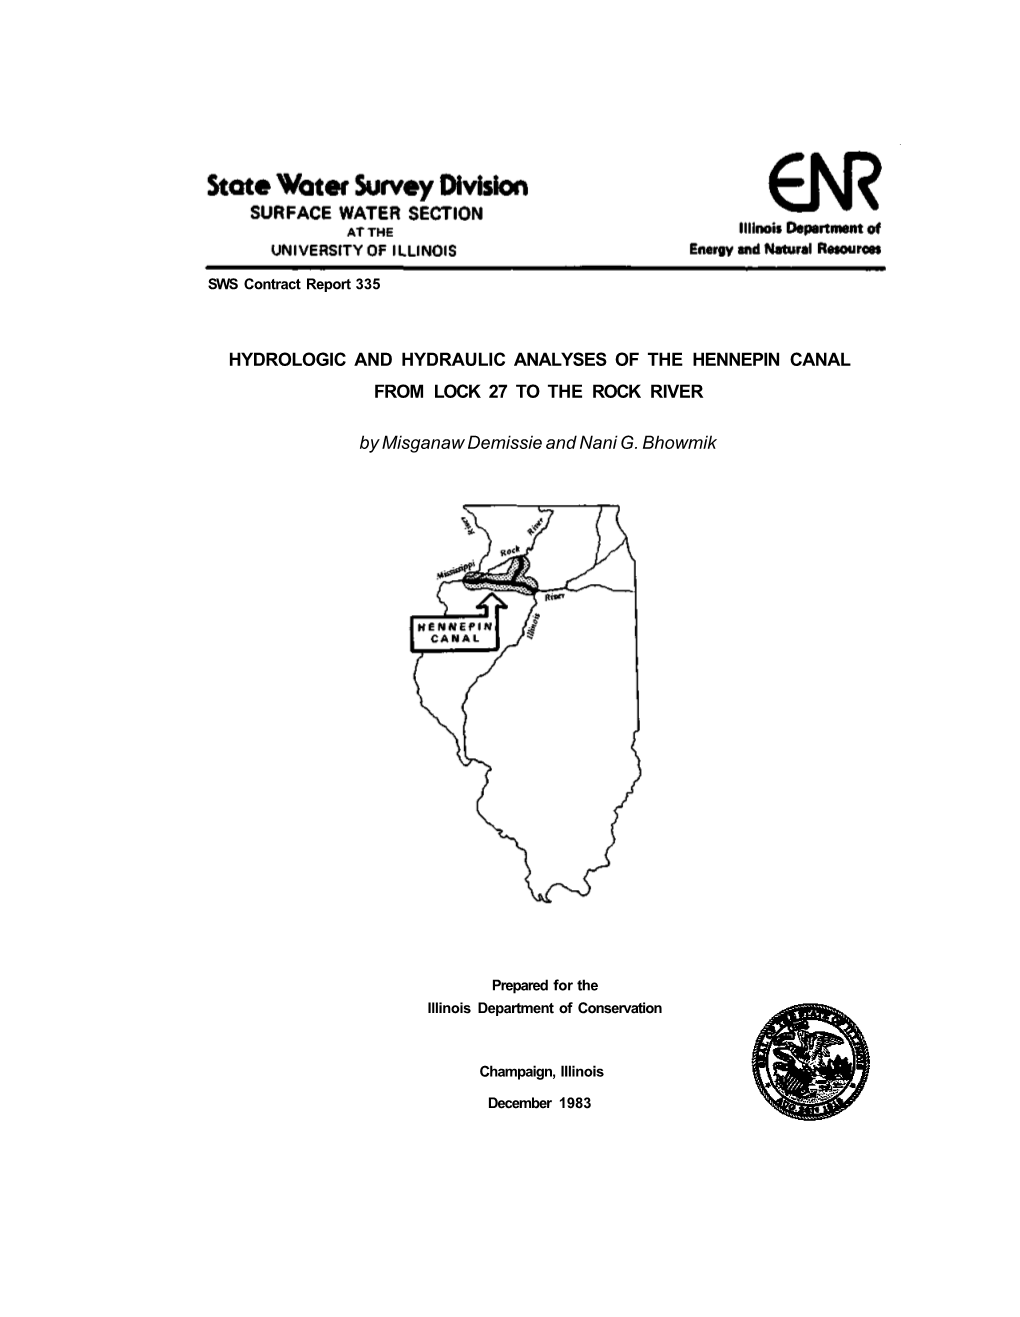 Hydrologic and Hydraulic Analyses of the Hennepin Canal from Lock 27 to the Rock River